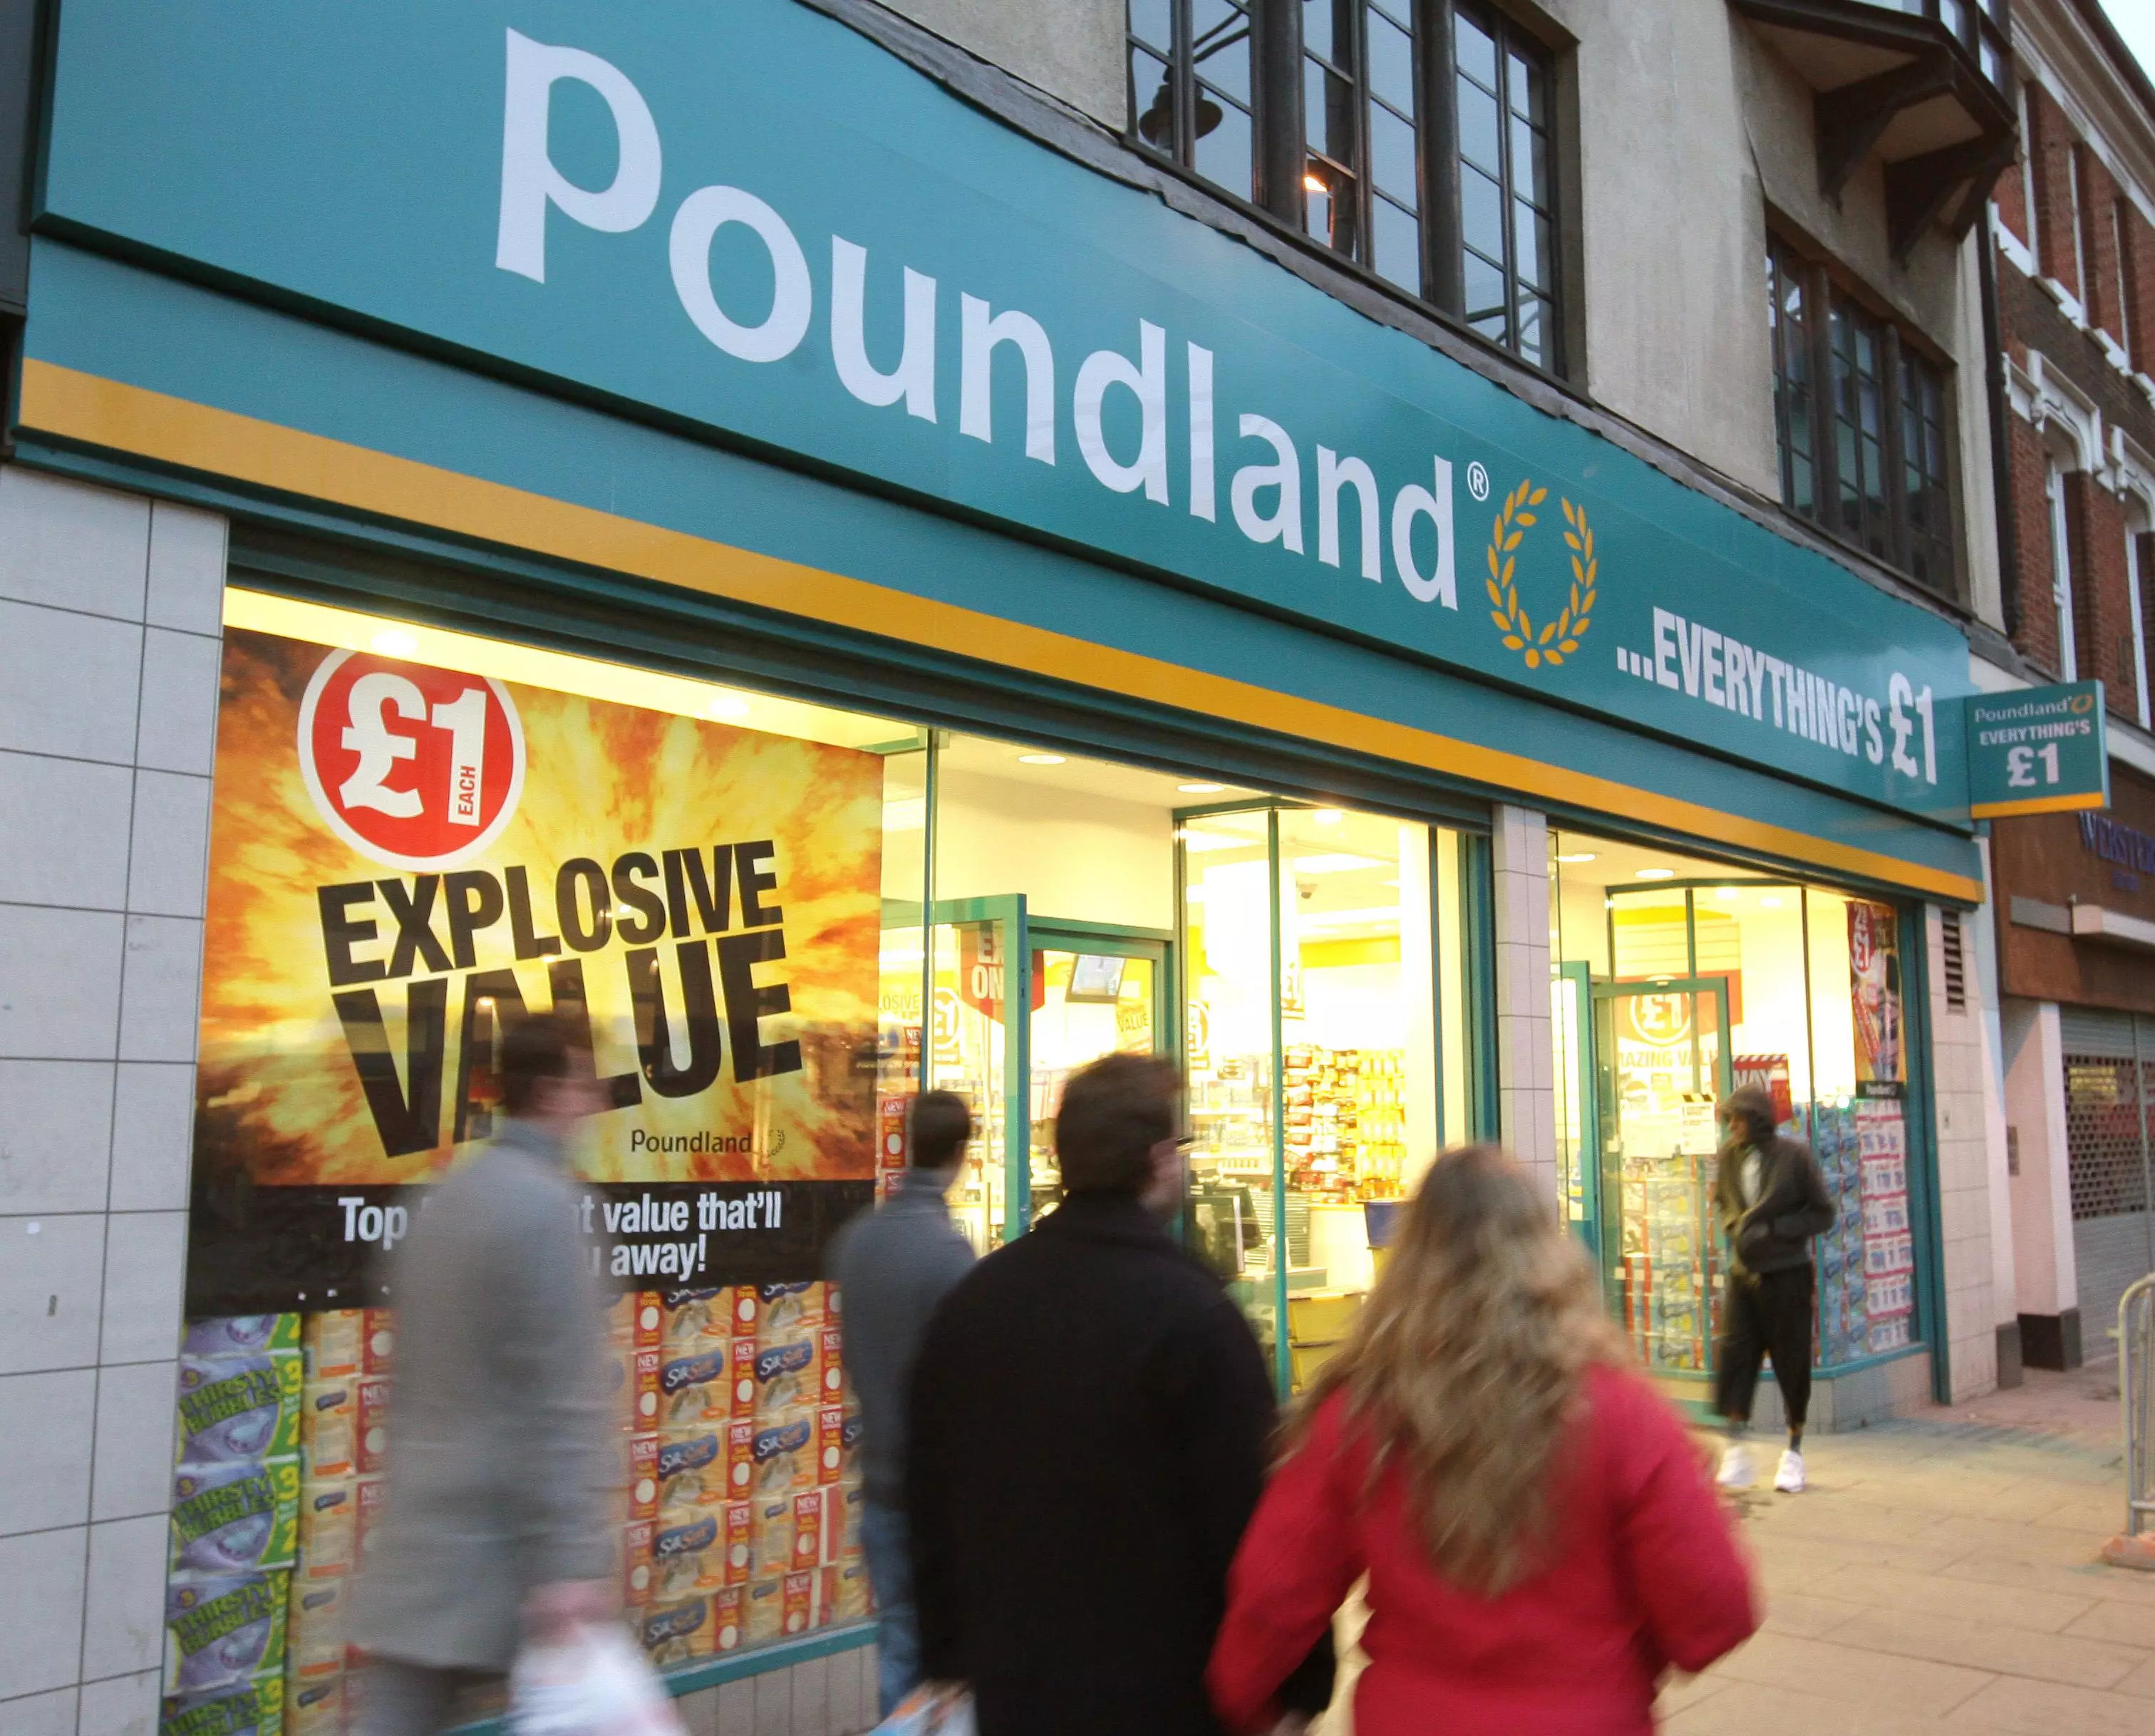 Droppings were found at Poundland in St John's Centre.